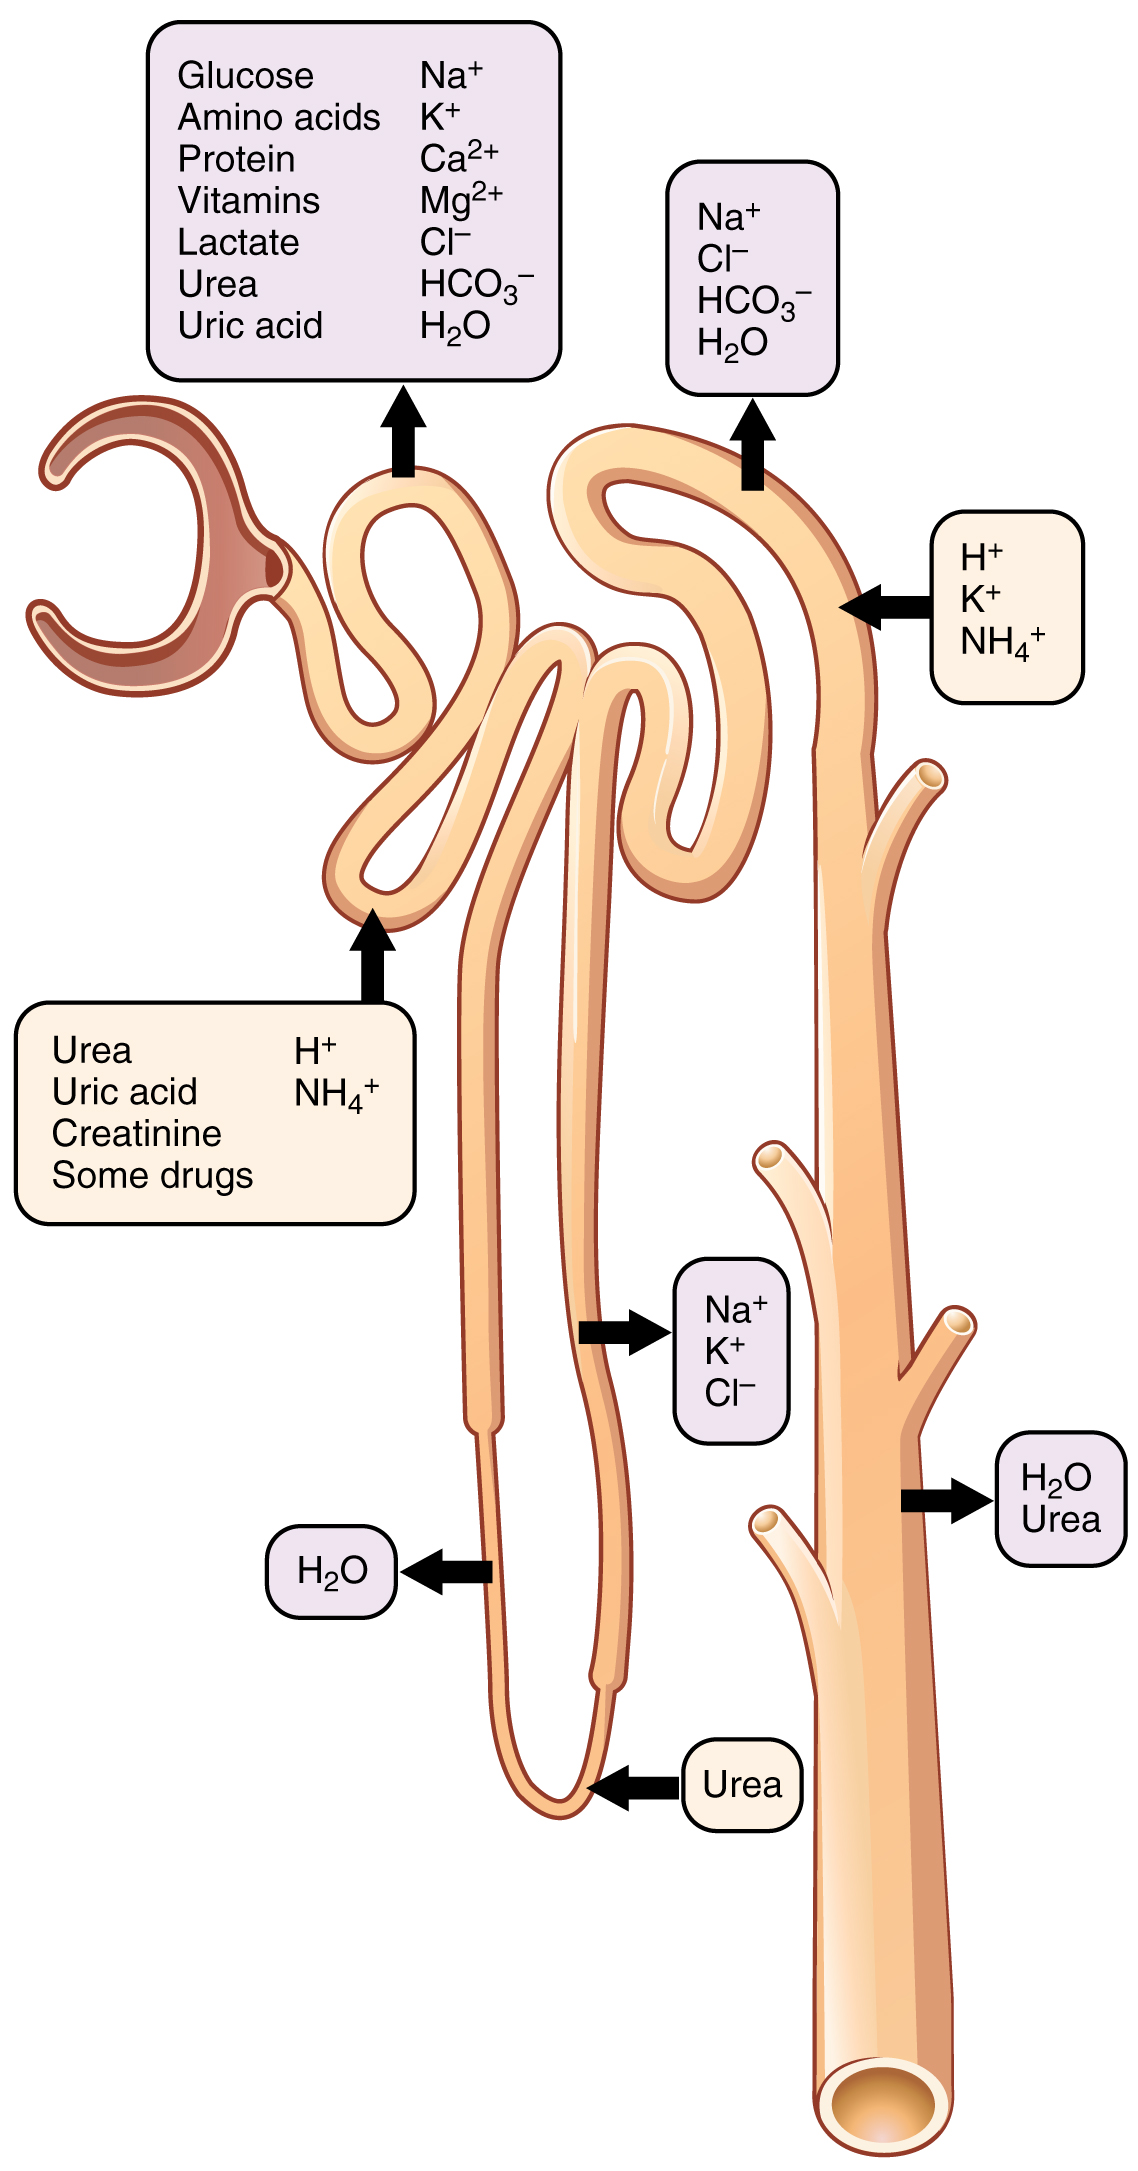 Secretion and reabsorption of water, ions and various substances throughout the nephron.